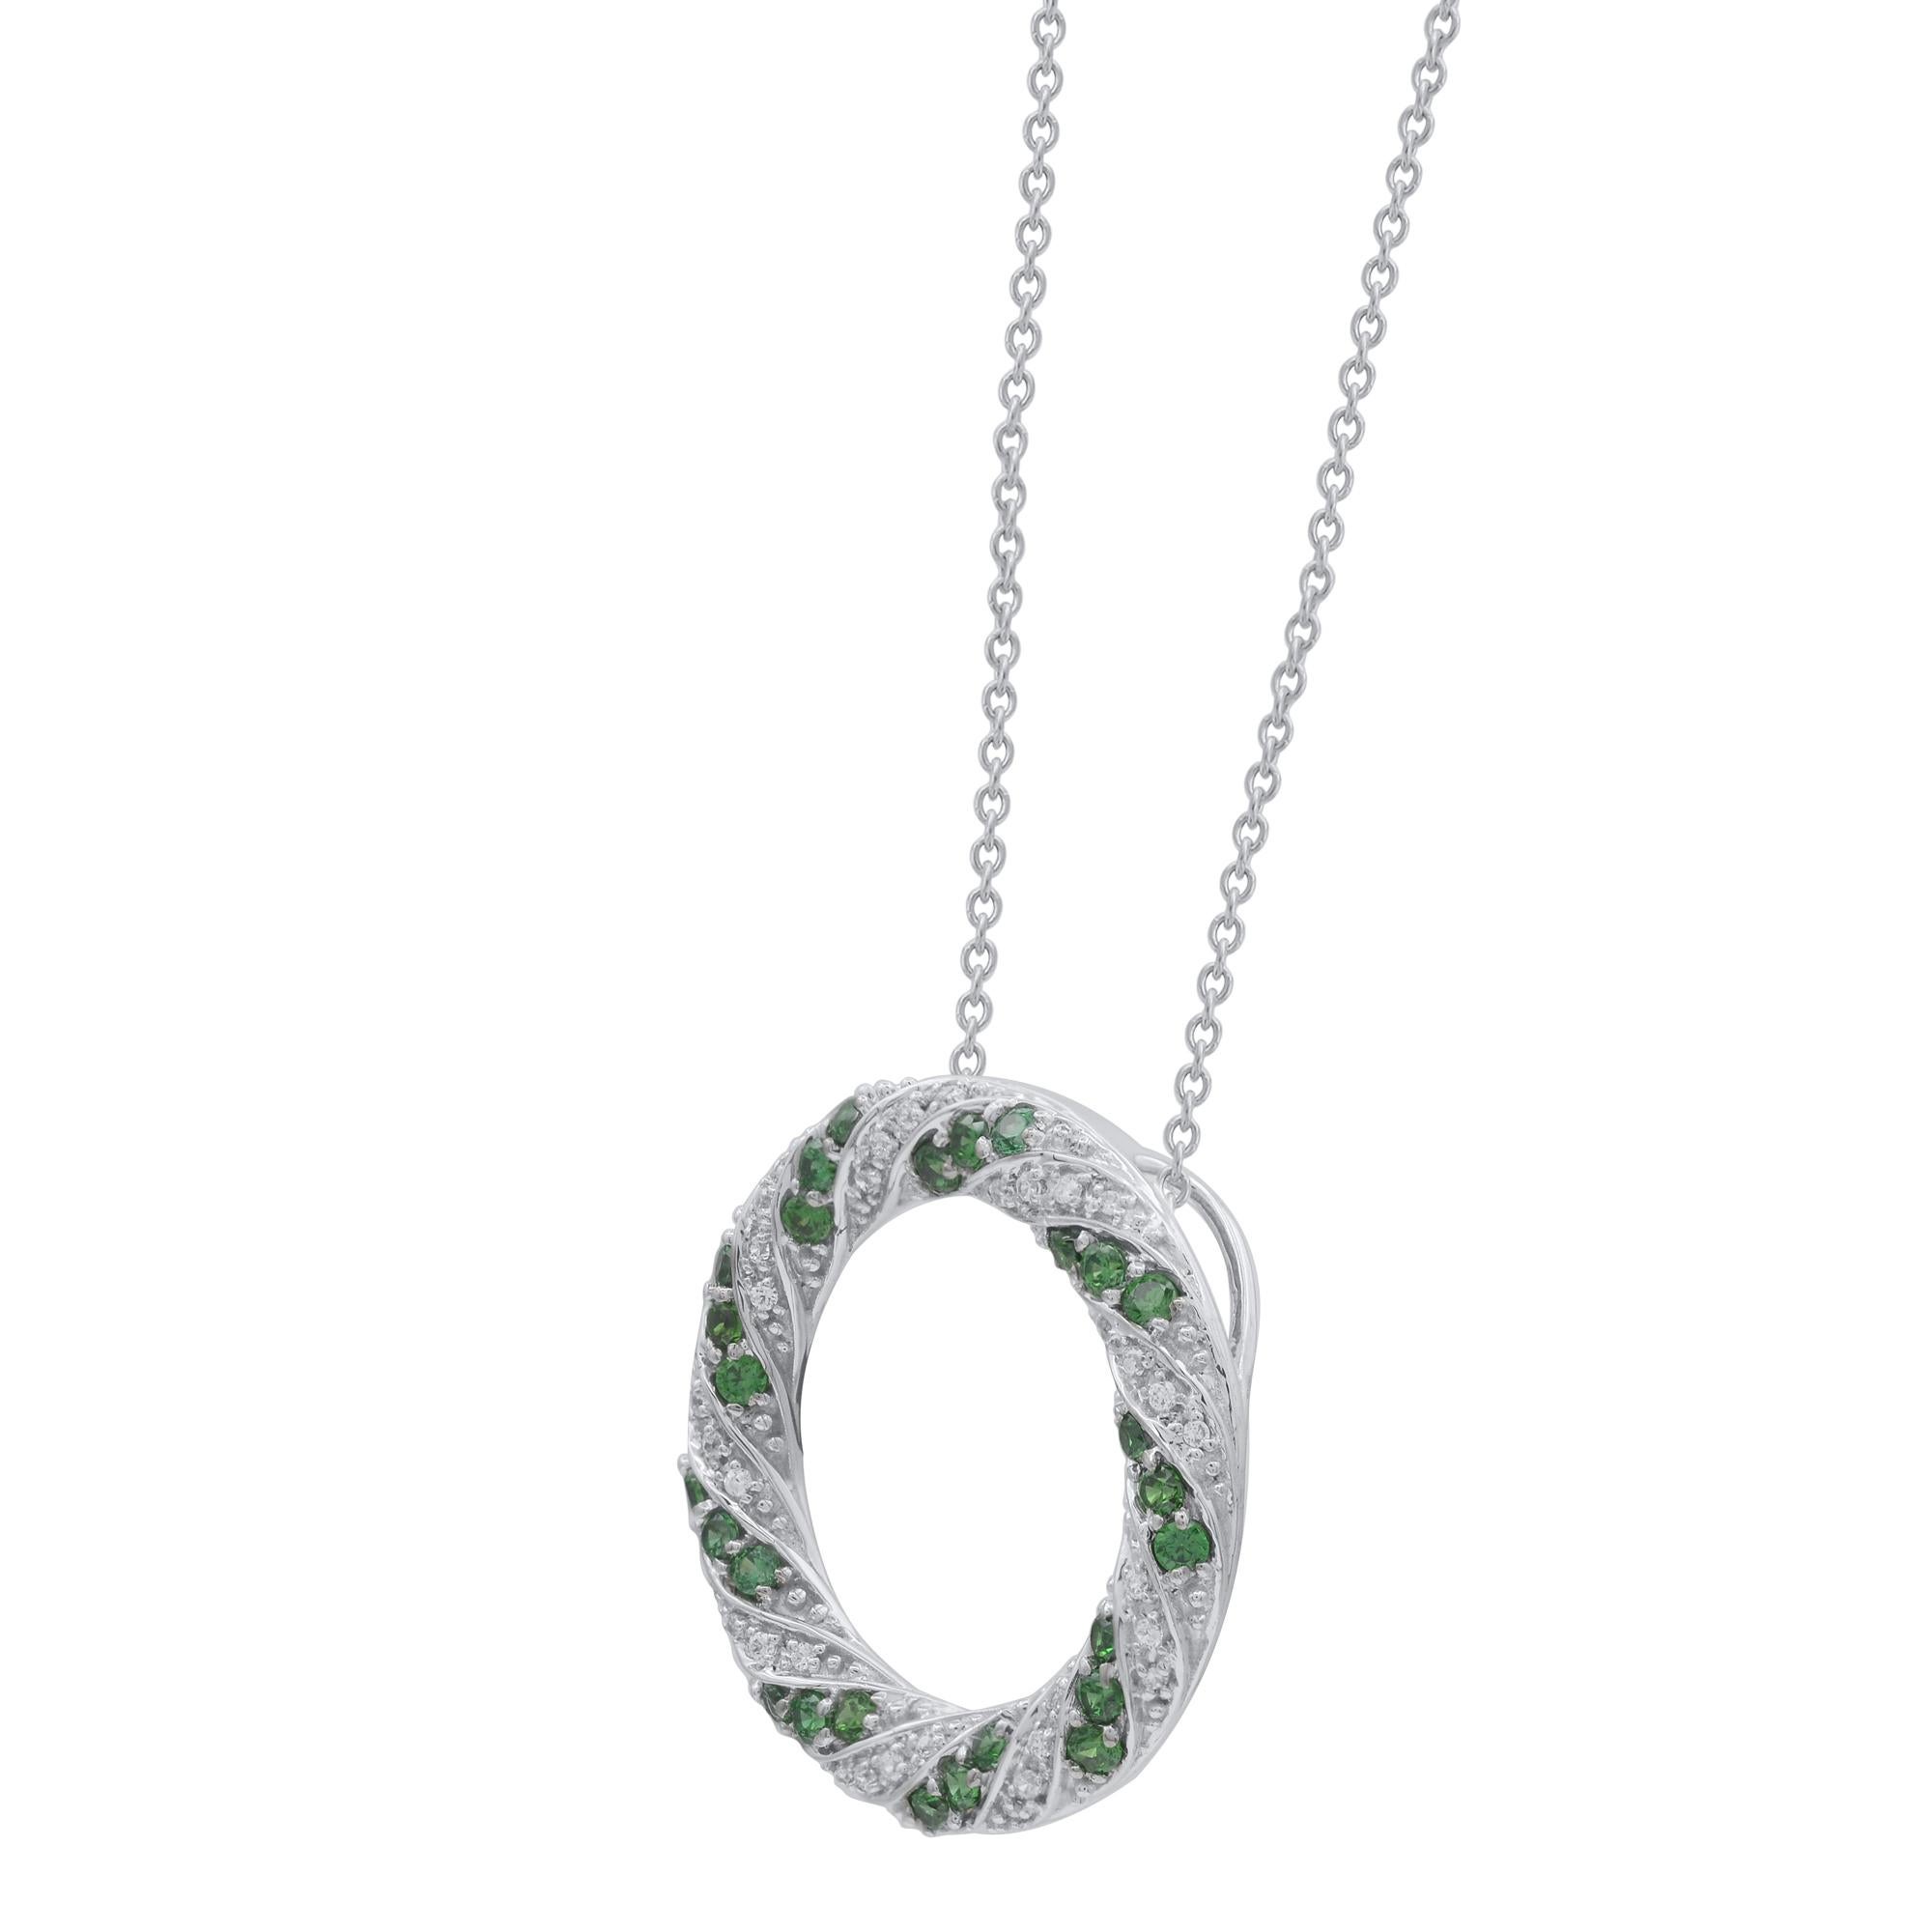 Create a casual yet elegant look with this green emerald and diamond open circle pendant. These circle pendant are studded with 27 green emerald  and 36 round natural diamonds in pave, prong setting in 18kt white gold. Diamonds are graded as H-I